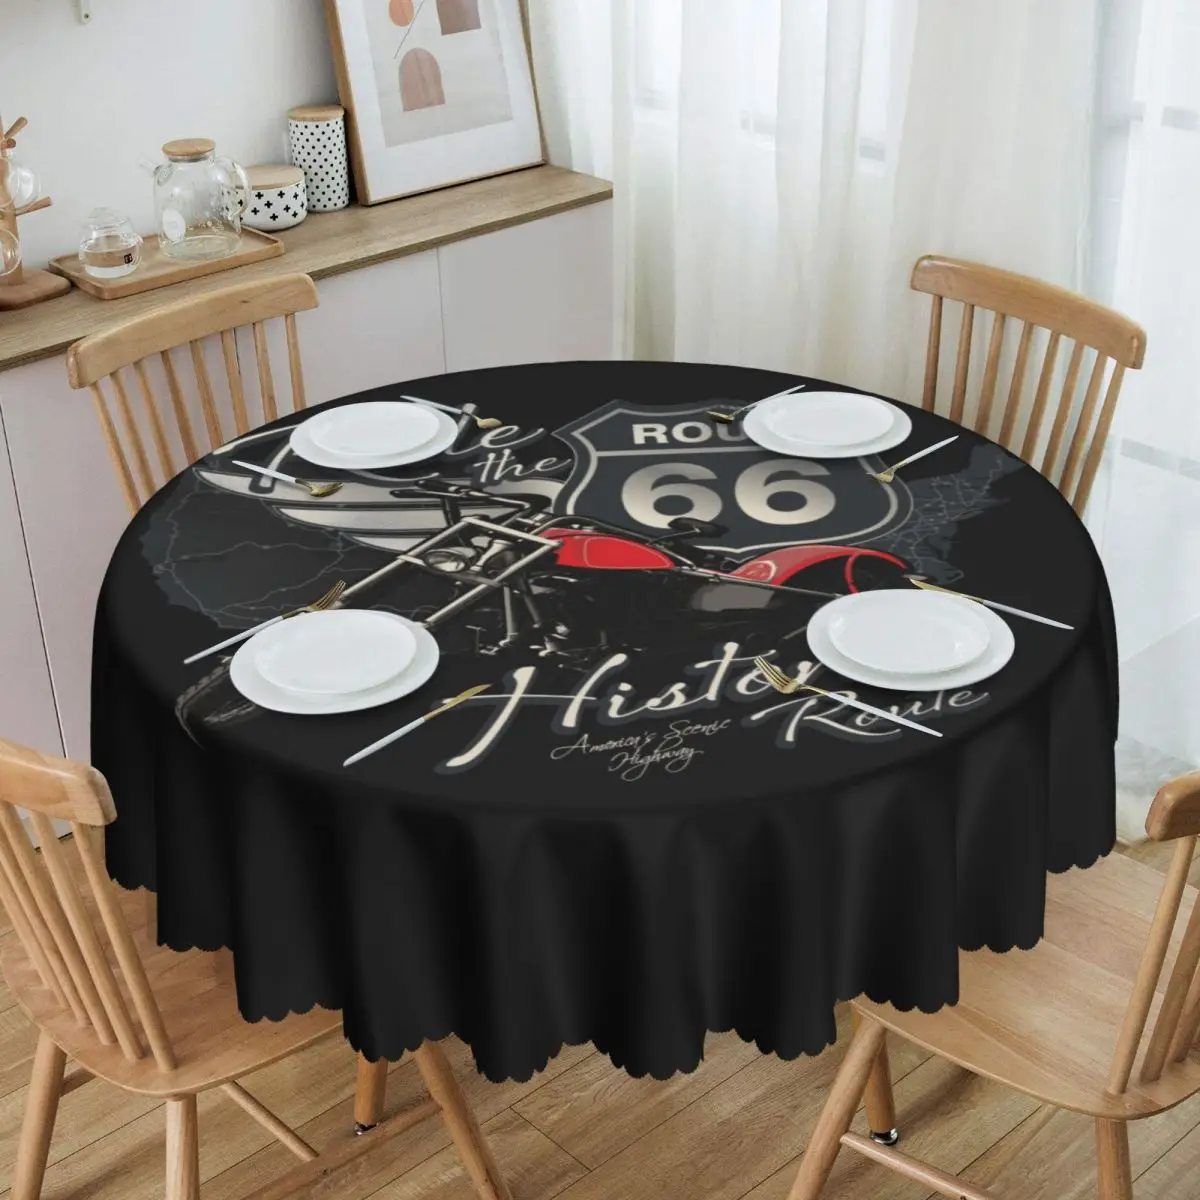 

Round Travel Motorcycle Ride The Historic Route 66 Tablecloth Waterproof Oil-Proof Table Cover USA America Highway Table Cloth